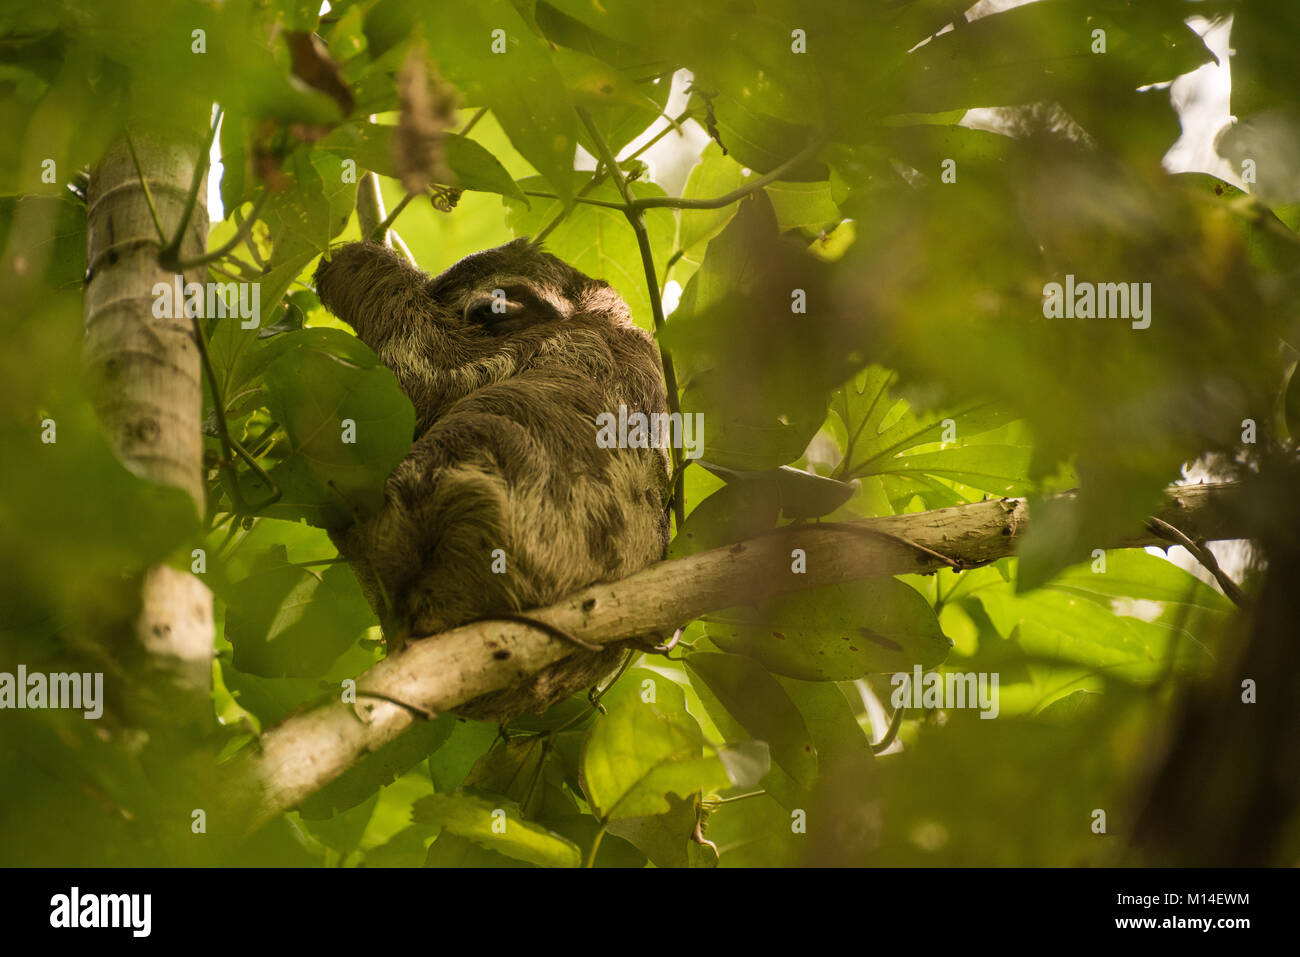 A brown throated sloth, one of the three toed sloth species, sleeping in a tree in the amazon jungle. Stock Photo